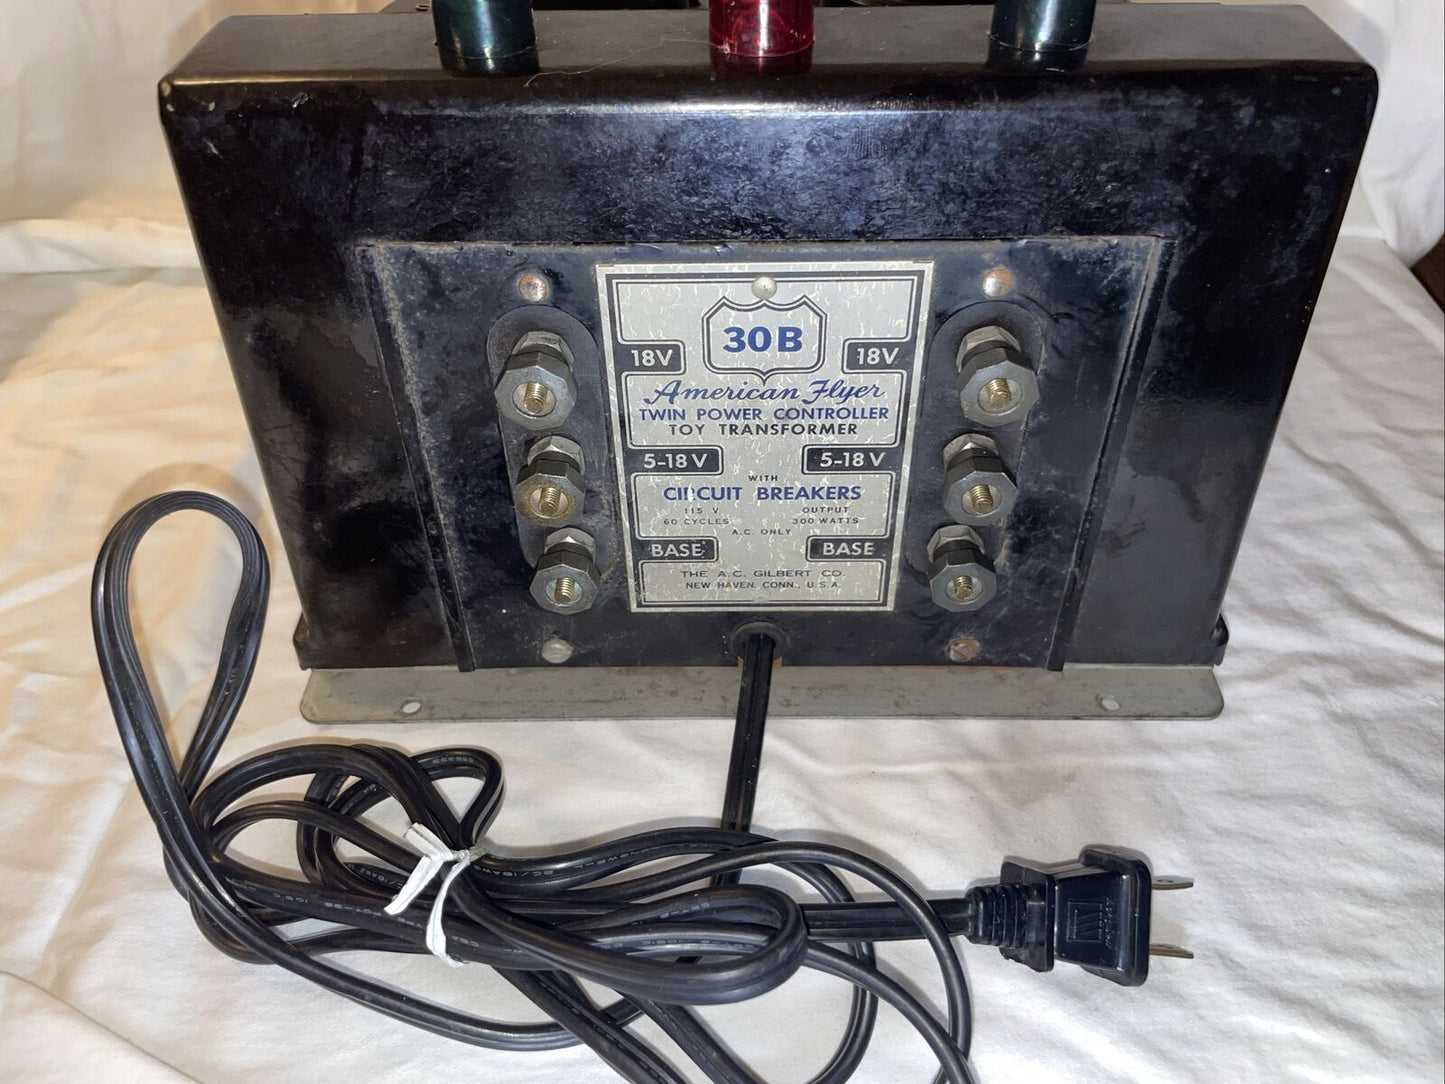 TESTED! Serviced! American Flyer 30B 18V 2 Channel Transformer. New Cord. C-6 VG